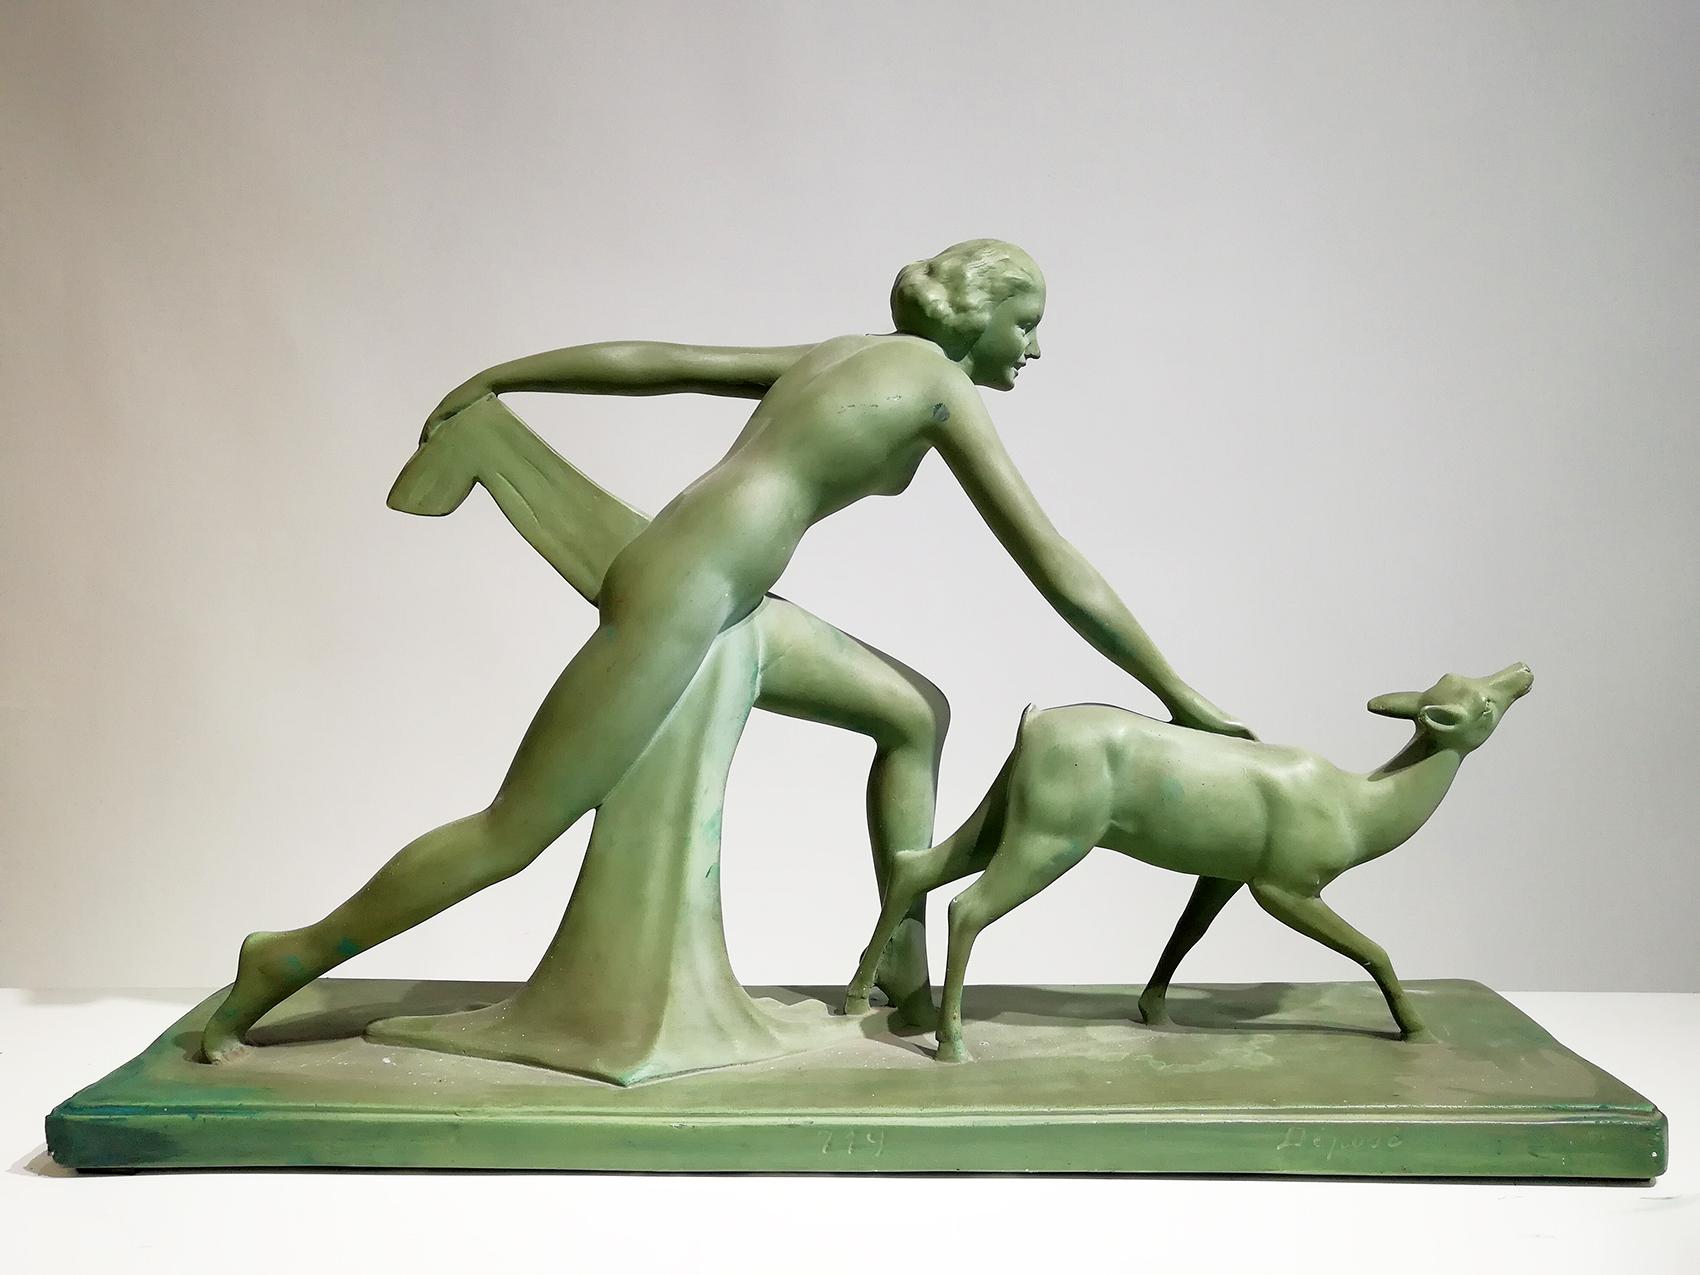 Art Deco terracotta sculpture of a young lady and her fawn in green patina. Signed by the artist on the base.
Salvatore Melani was an Italian impressionist and modern sculptor who was born in 1902.
       